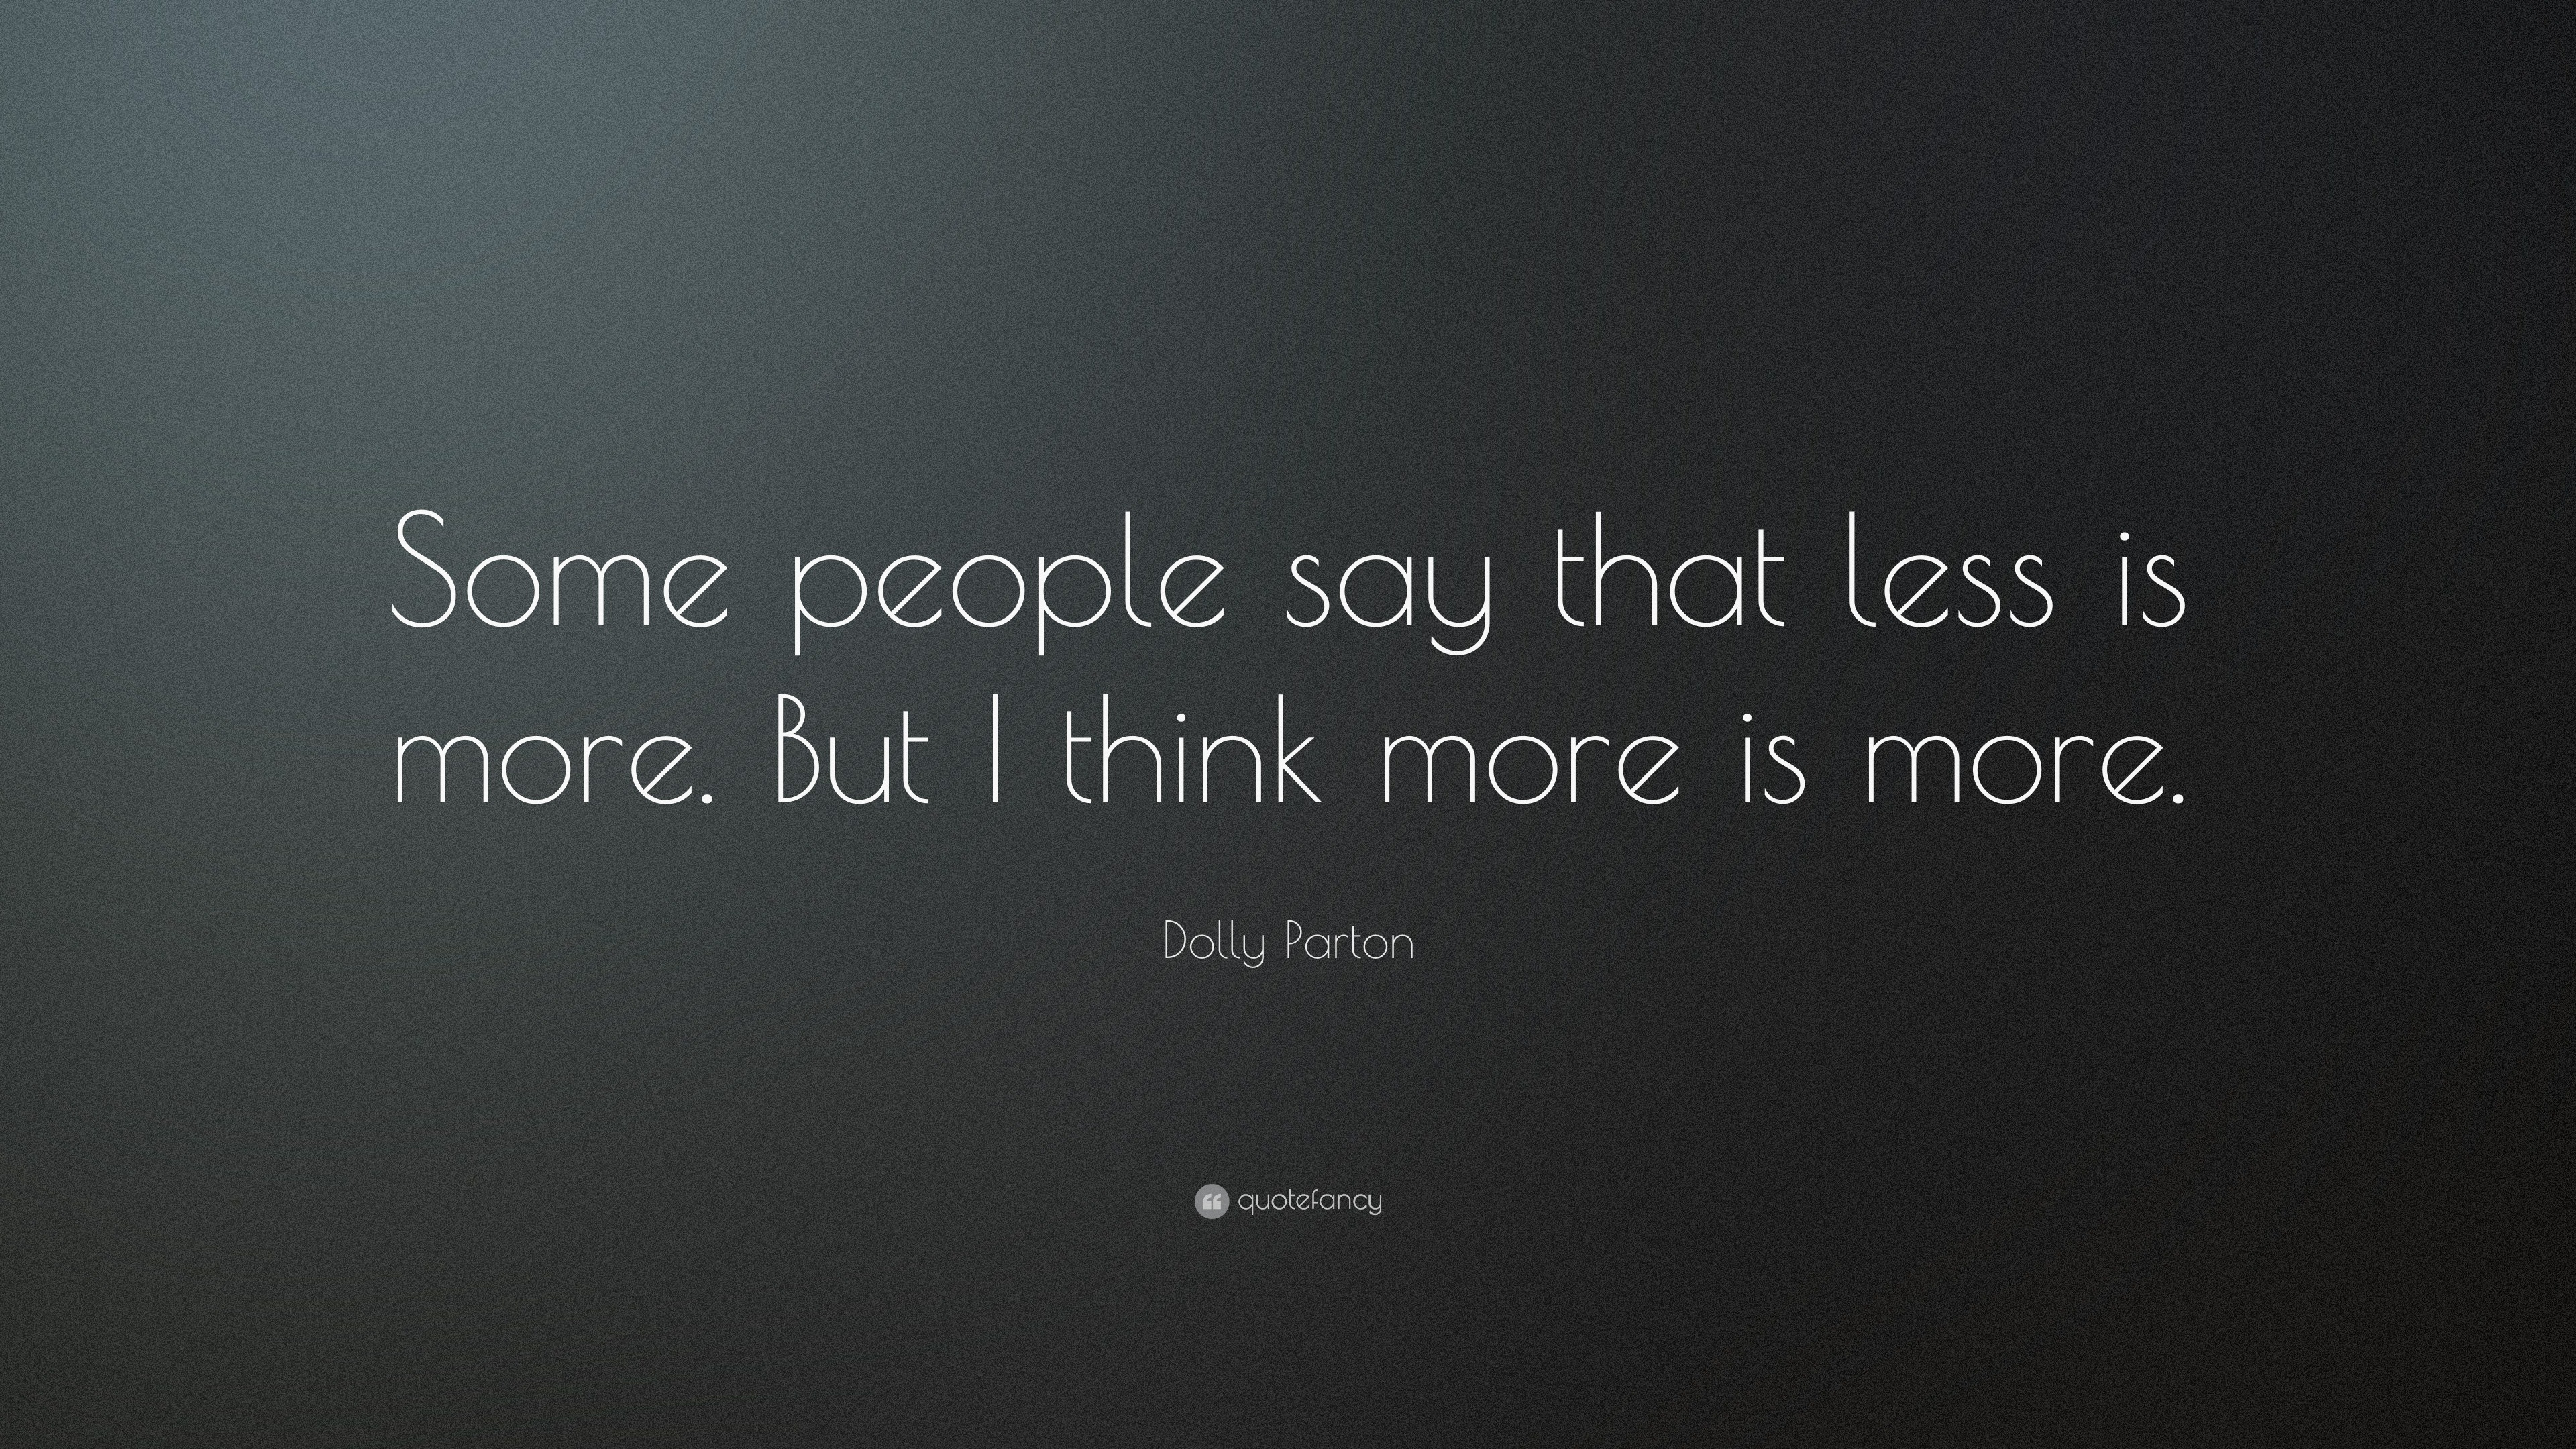 Dolly Parton Quote: “Some people say that less is more. But I think ...